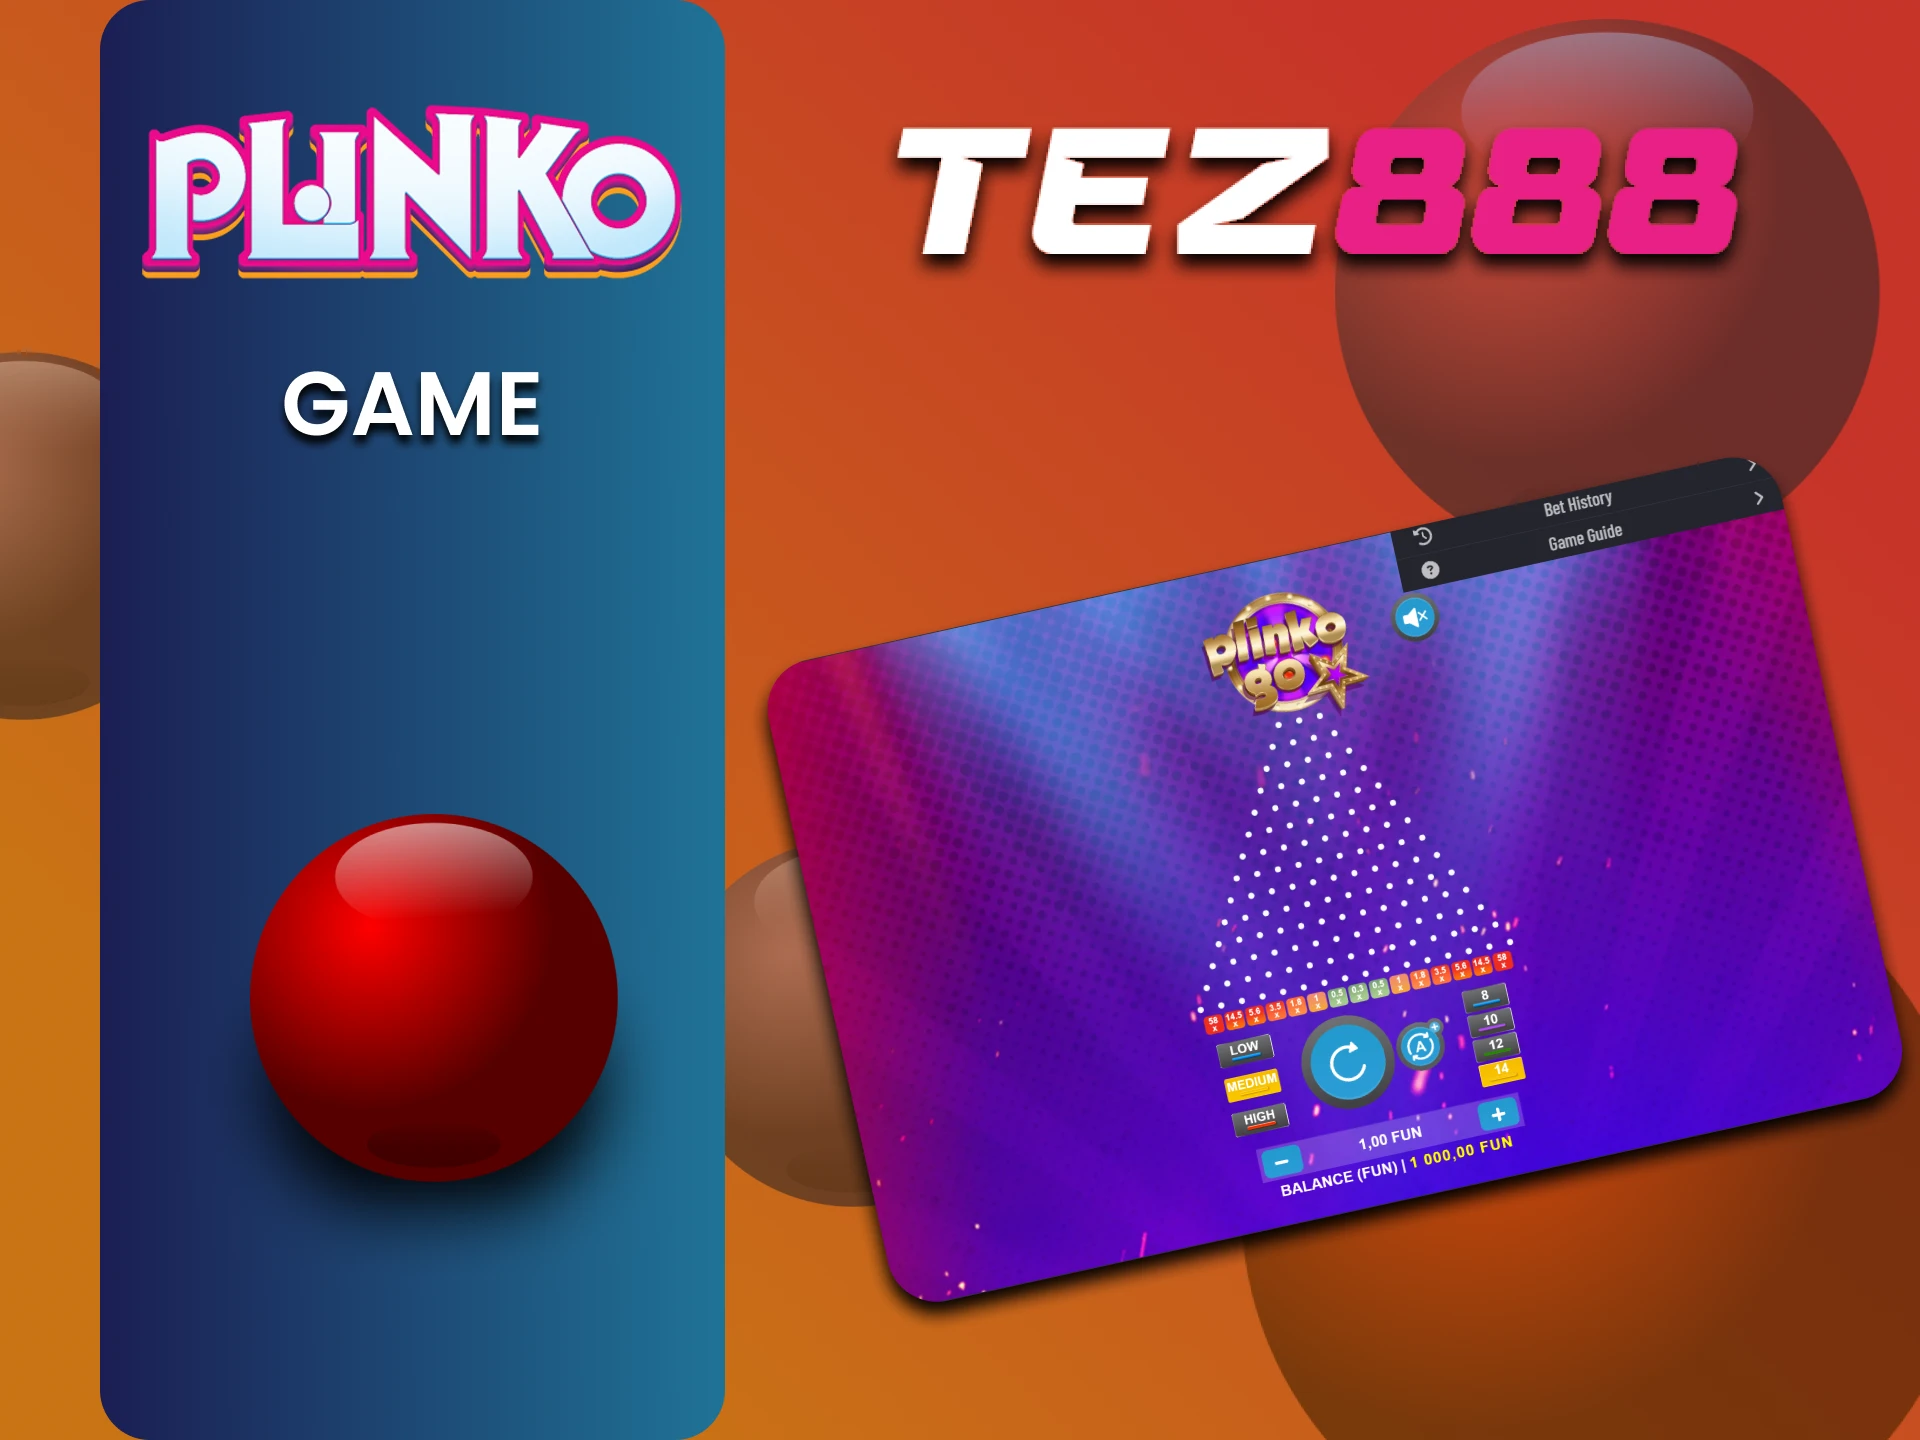 Learn about the game Plinko on the Tez888 website.